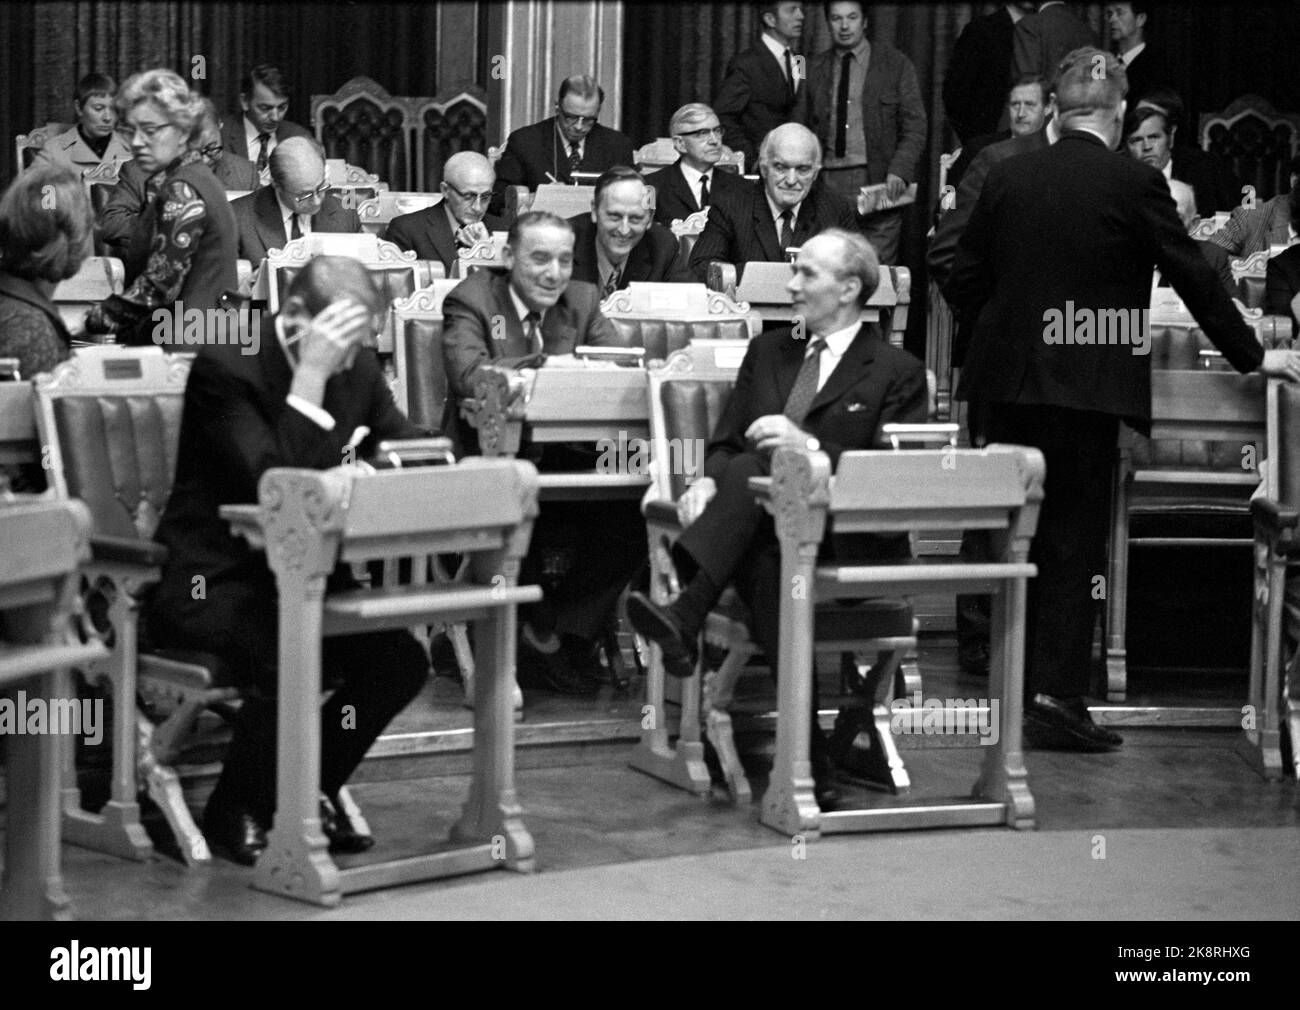 Oslo 197210. The Storting. Representatives in the Storting Hall before the coalition government between the Christian People's Party, the Center Party and the Left are ready. Prime Minister Trygve Bratteli in the middle of the picture, in front of Jo Benkow .. Photo Sverre A. Børretzen / Current / NTB Stock Photo